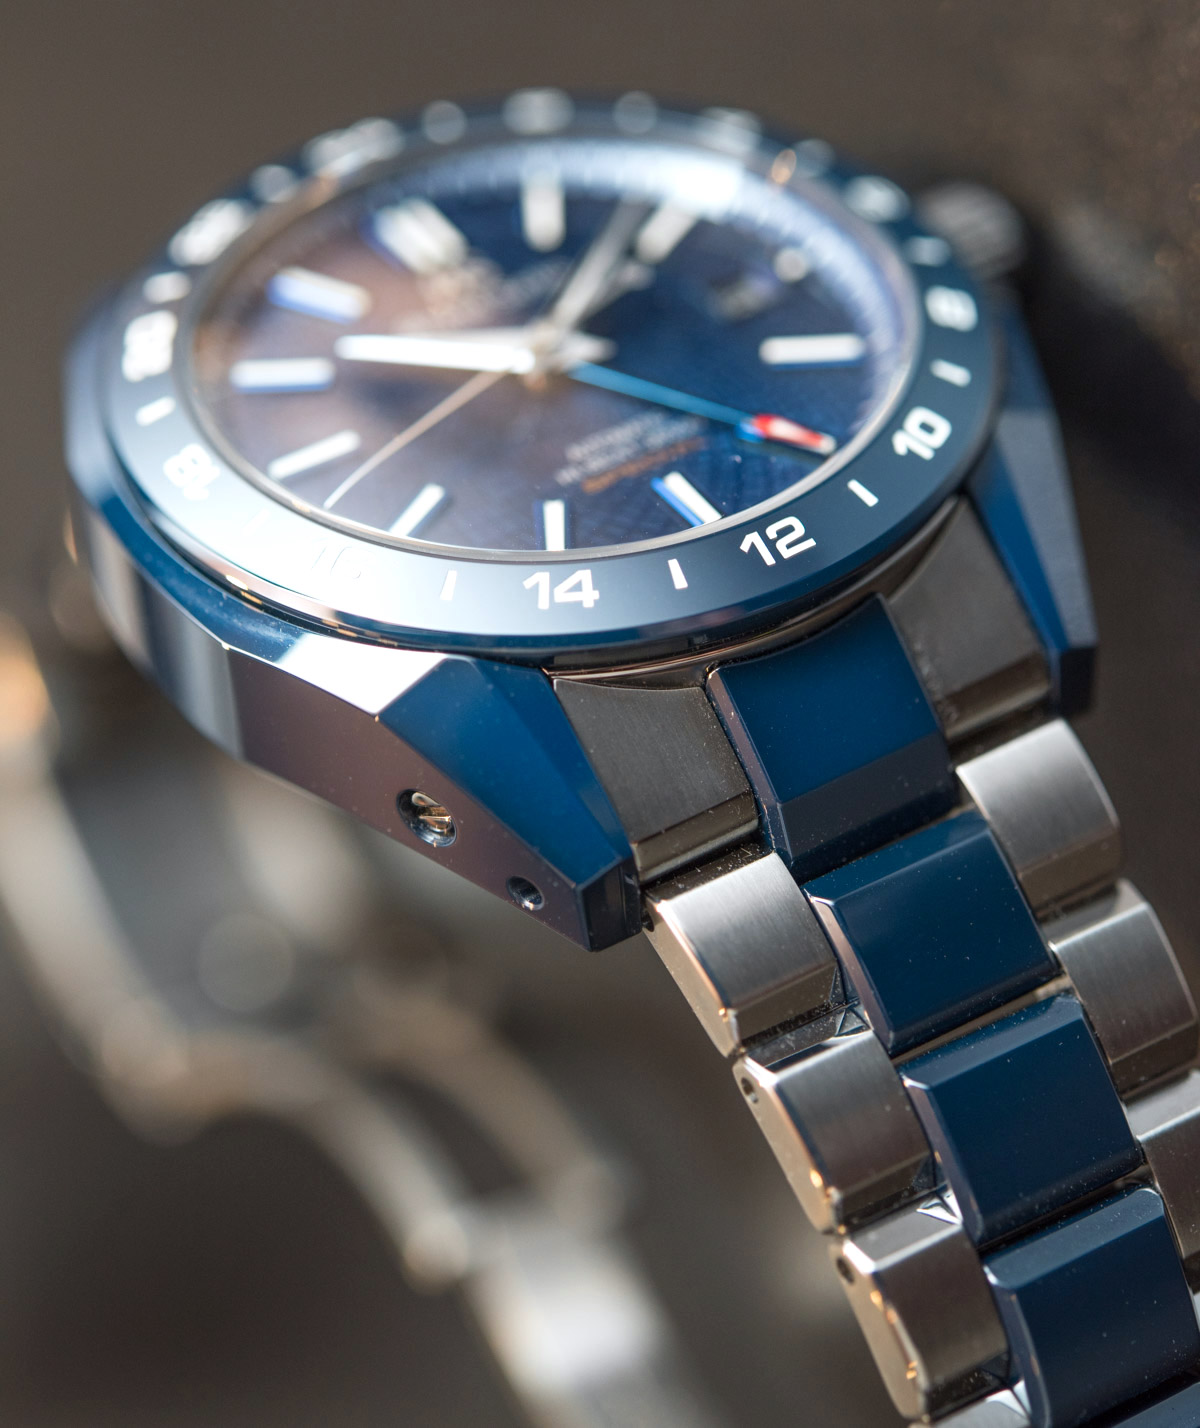 Grand Seiko Blue Ceramic Hi-Beat GMT 'Special' Limited Edition SBGJ229-A  Hands-On | aBlogtoWatch